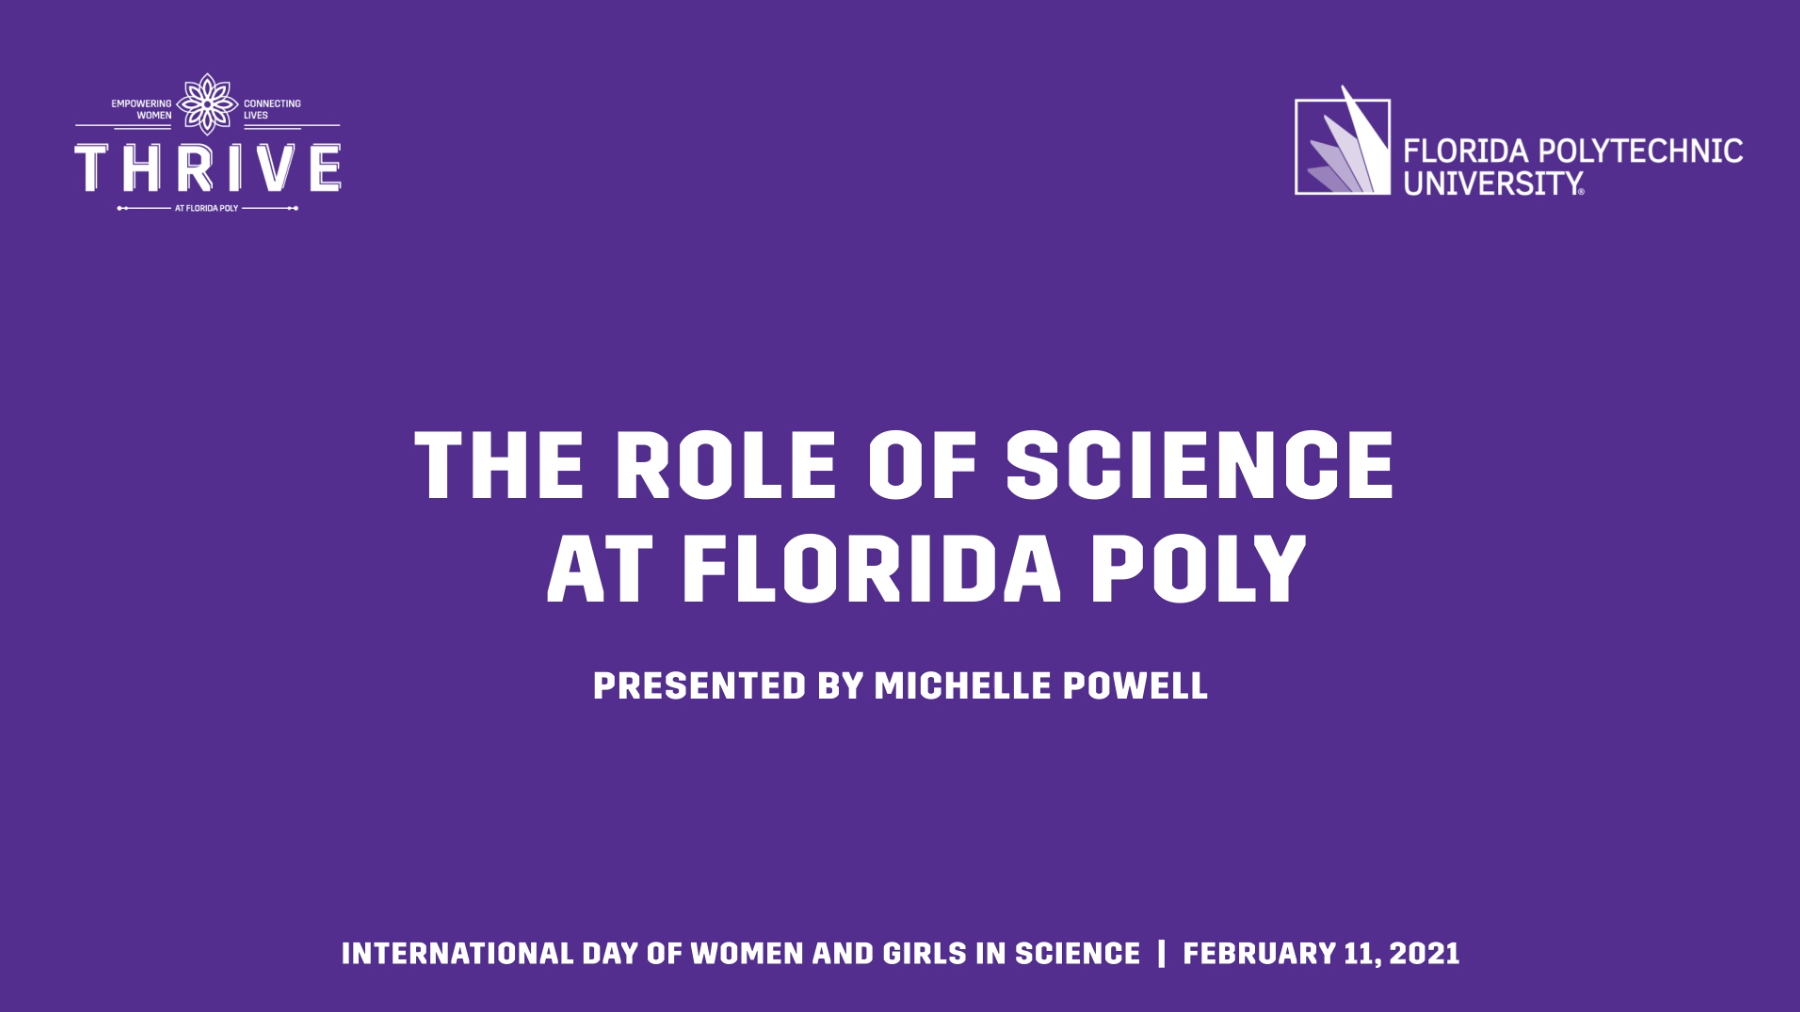 The Role of Science at Florida Poly